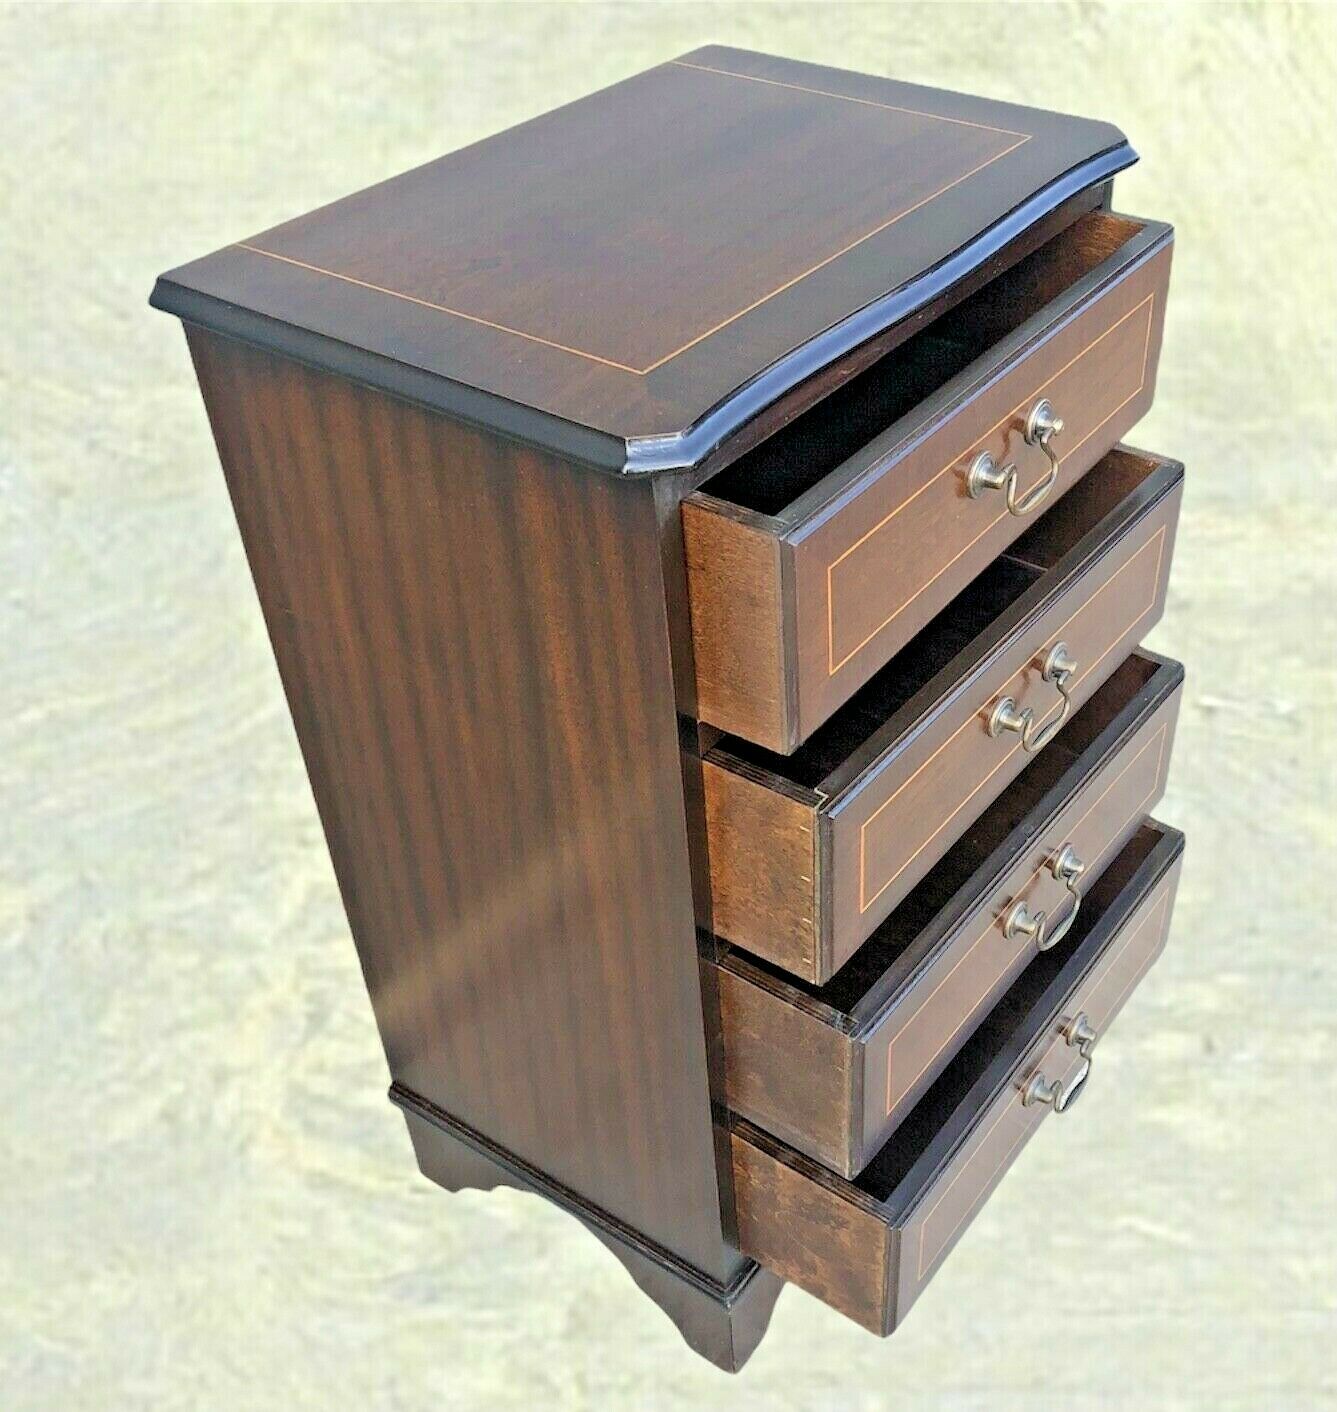 Handsome Pair Of Vintage Mahogany Bedside Chests ( SOLD )